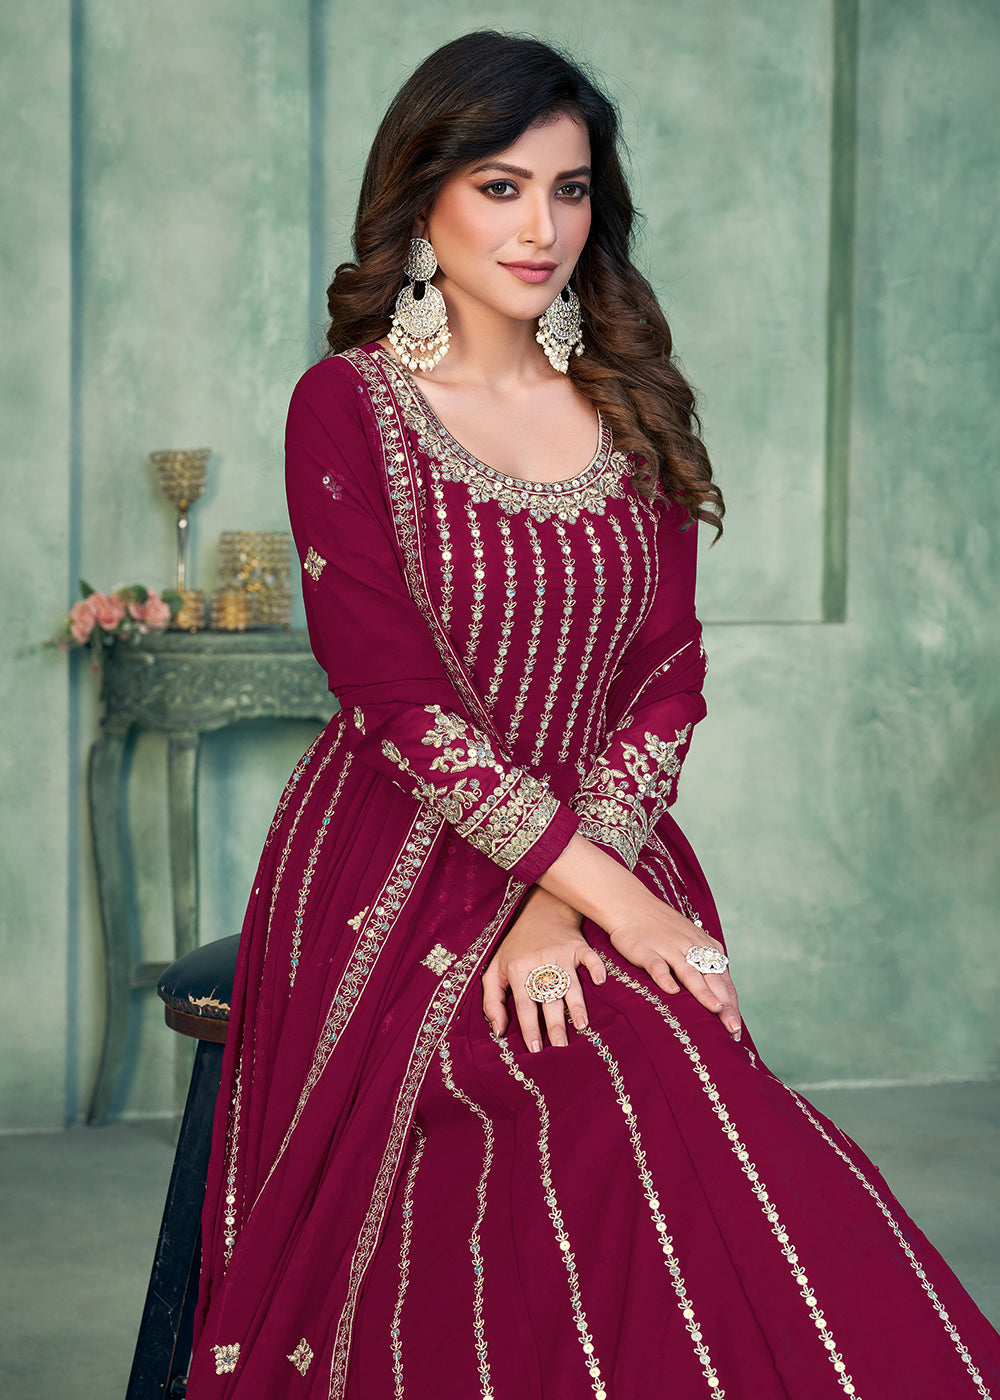 Buy Now Georgette Fabric Magenta Embroidered Wedding Party Anarkali Suit Online in USA, UK, Australia, New Zealand, Canada & Worldwide at Empress Clothing.